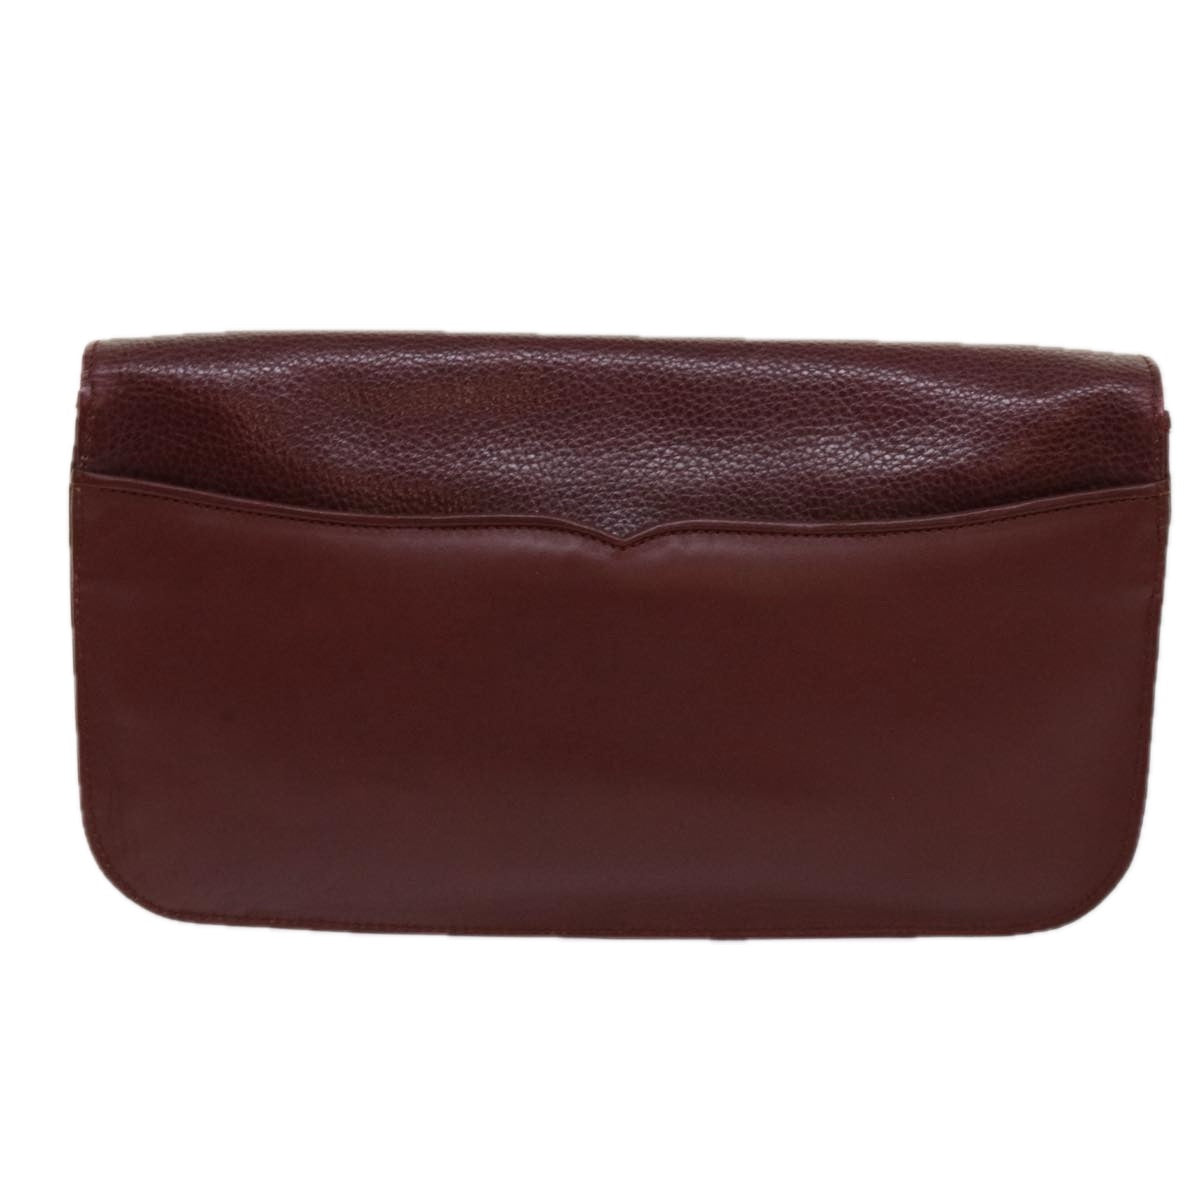 CARTIER Clutch Bag Leather Wine Red Auth ar11246 - 0